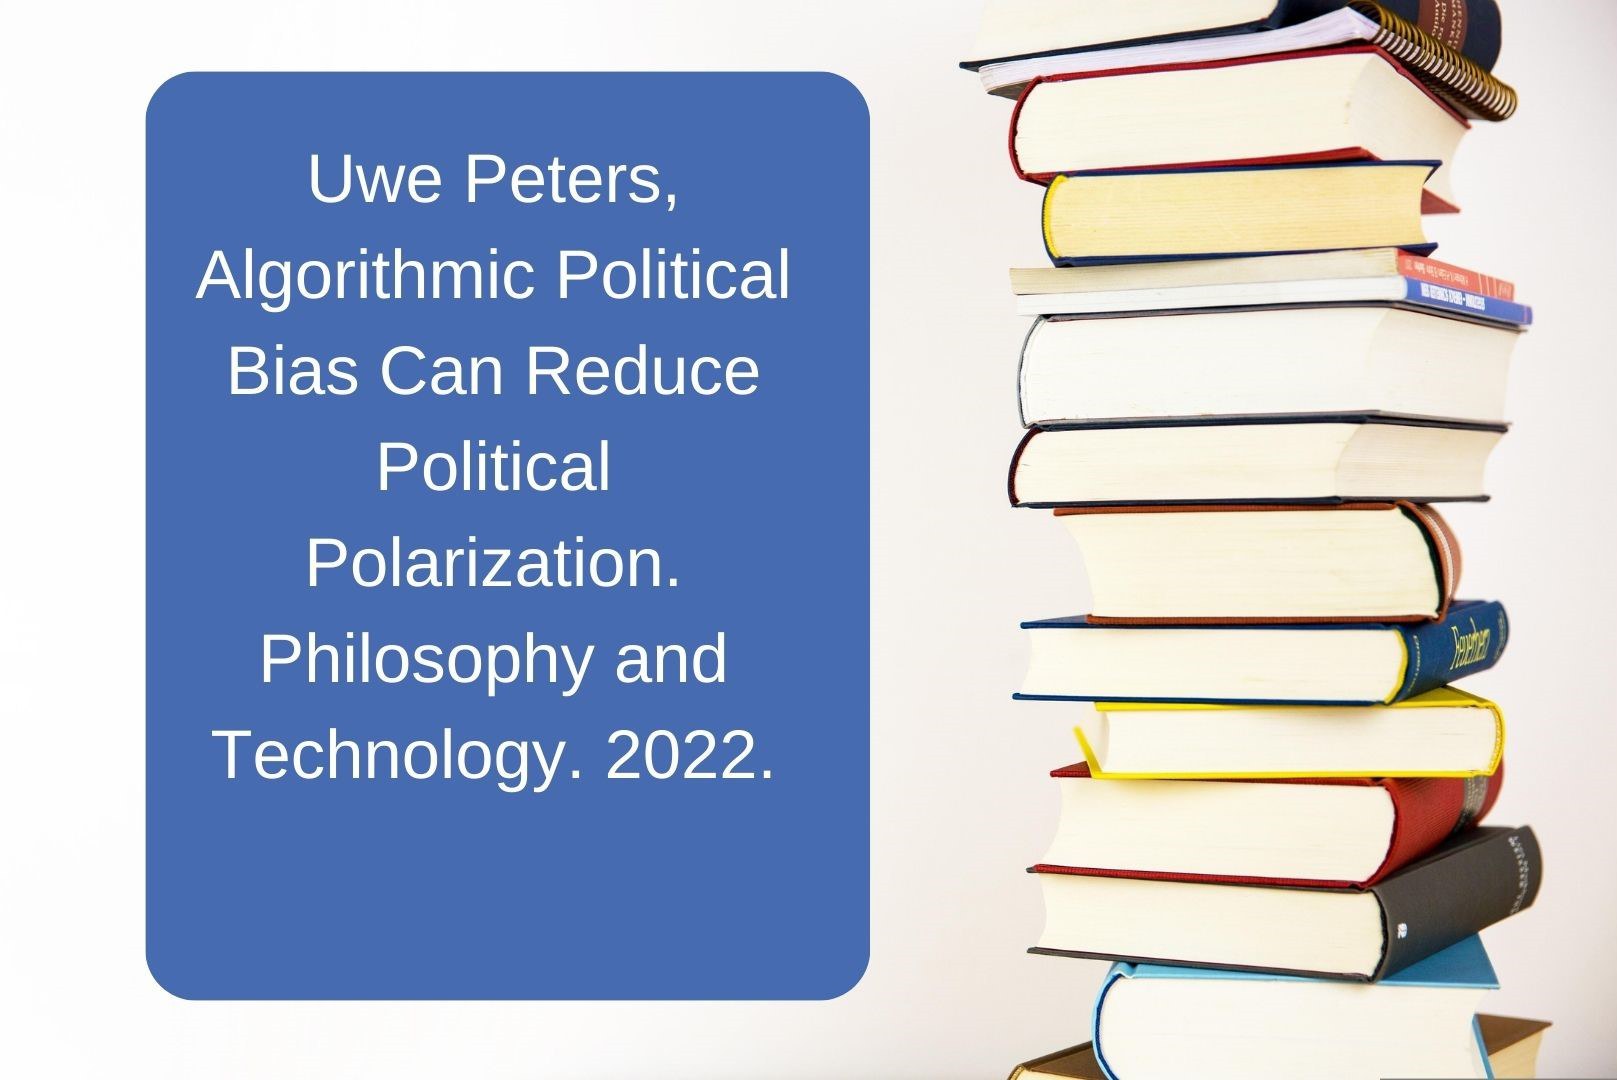 Uwe Peters, Algorithmic Political Bias Can Reduce Political Polarization. Philosophy and Technology. 2022..jpg